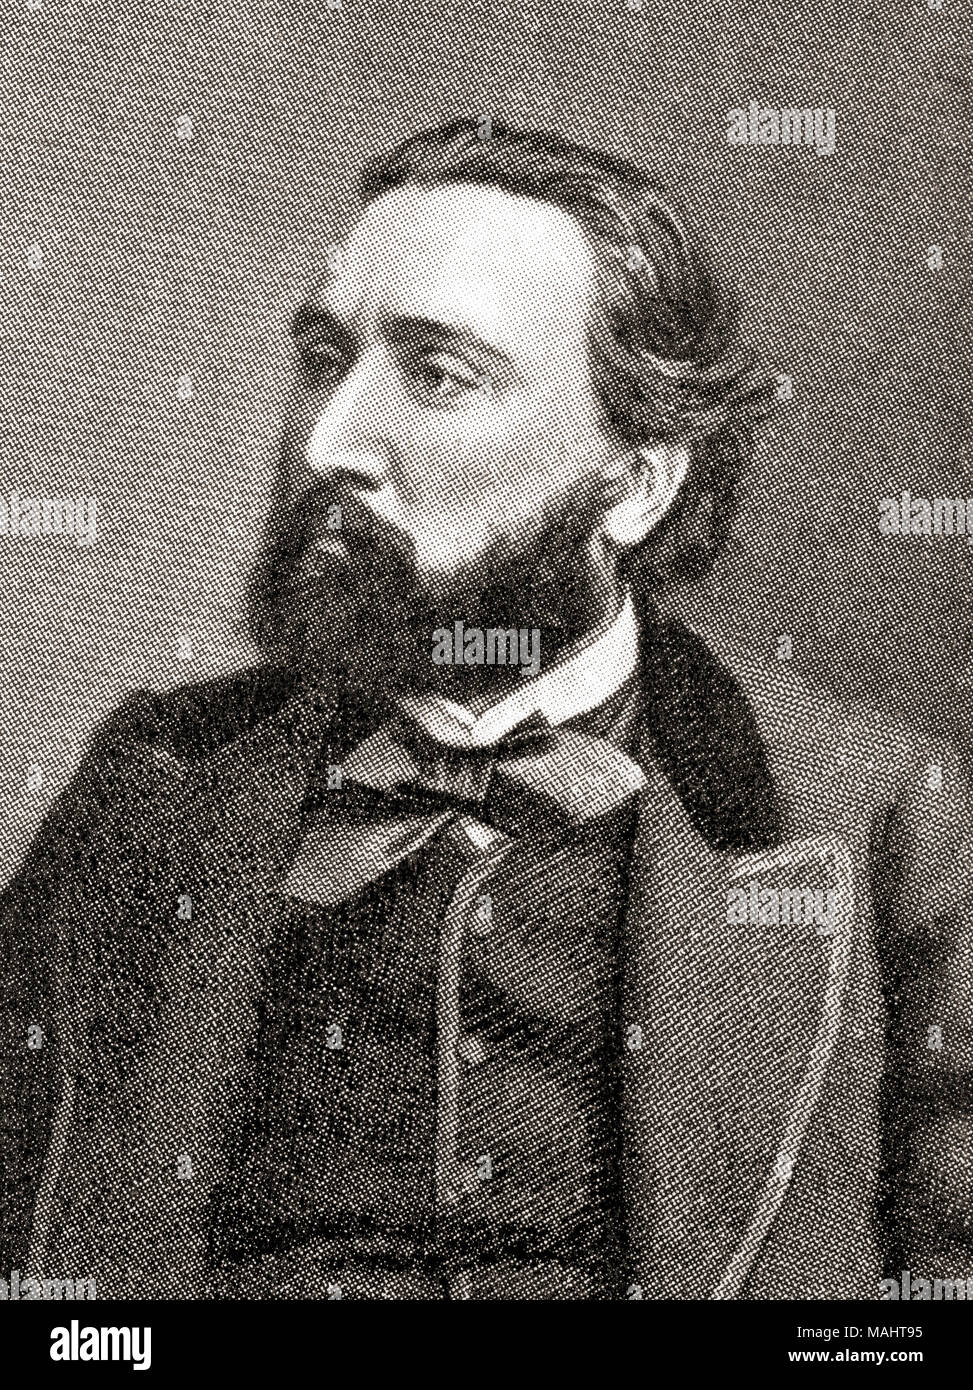 Léon Gambetta, 1838 – 1882.  French statesman.  From Hutchinson's History of the Nations, published 1915 Stock Photo